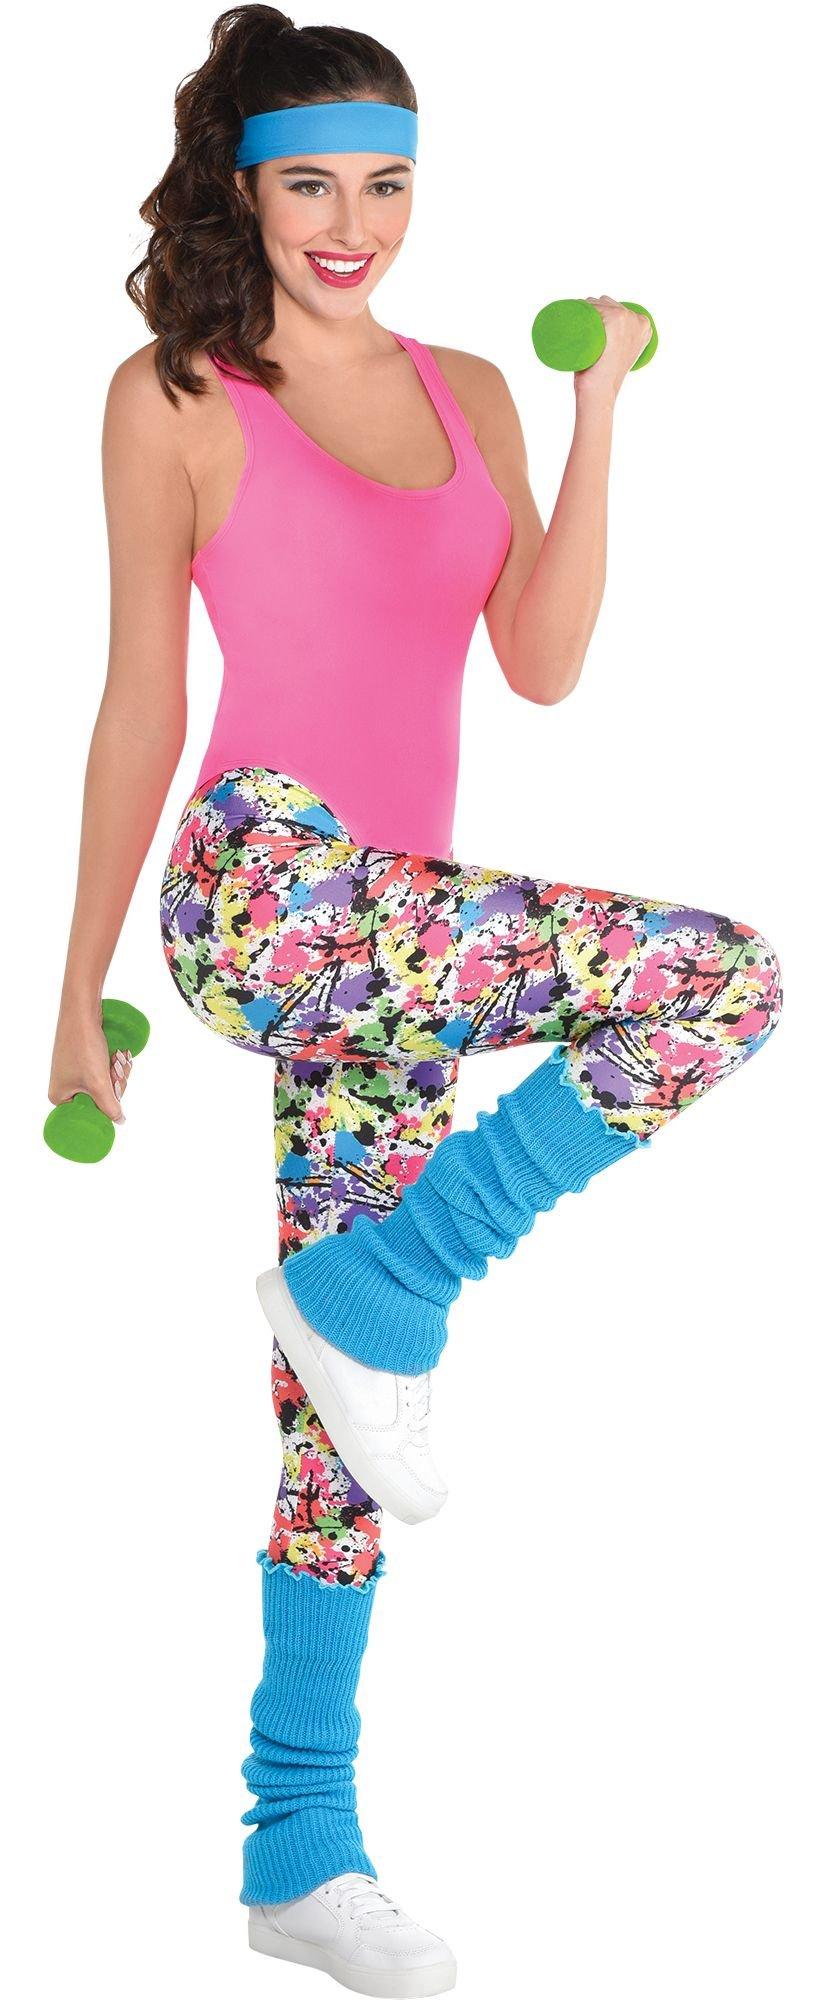 Adult 80s Exercise Costume Accessory Kit